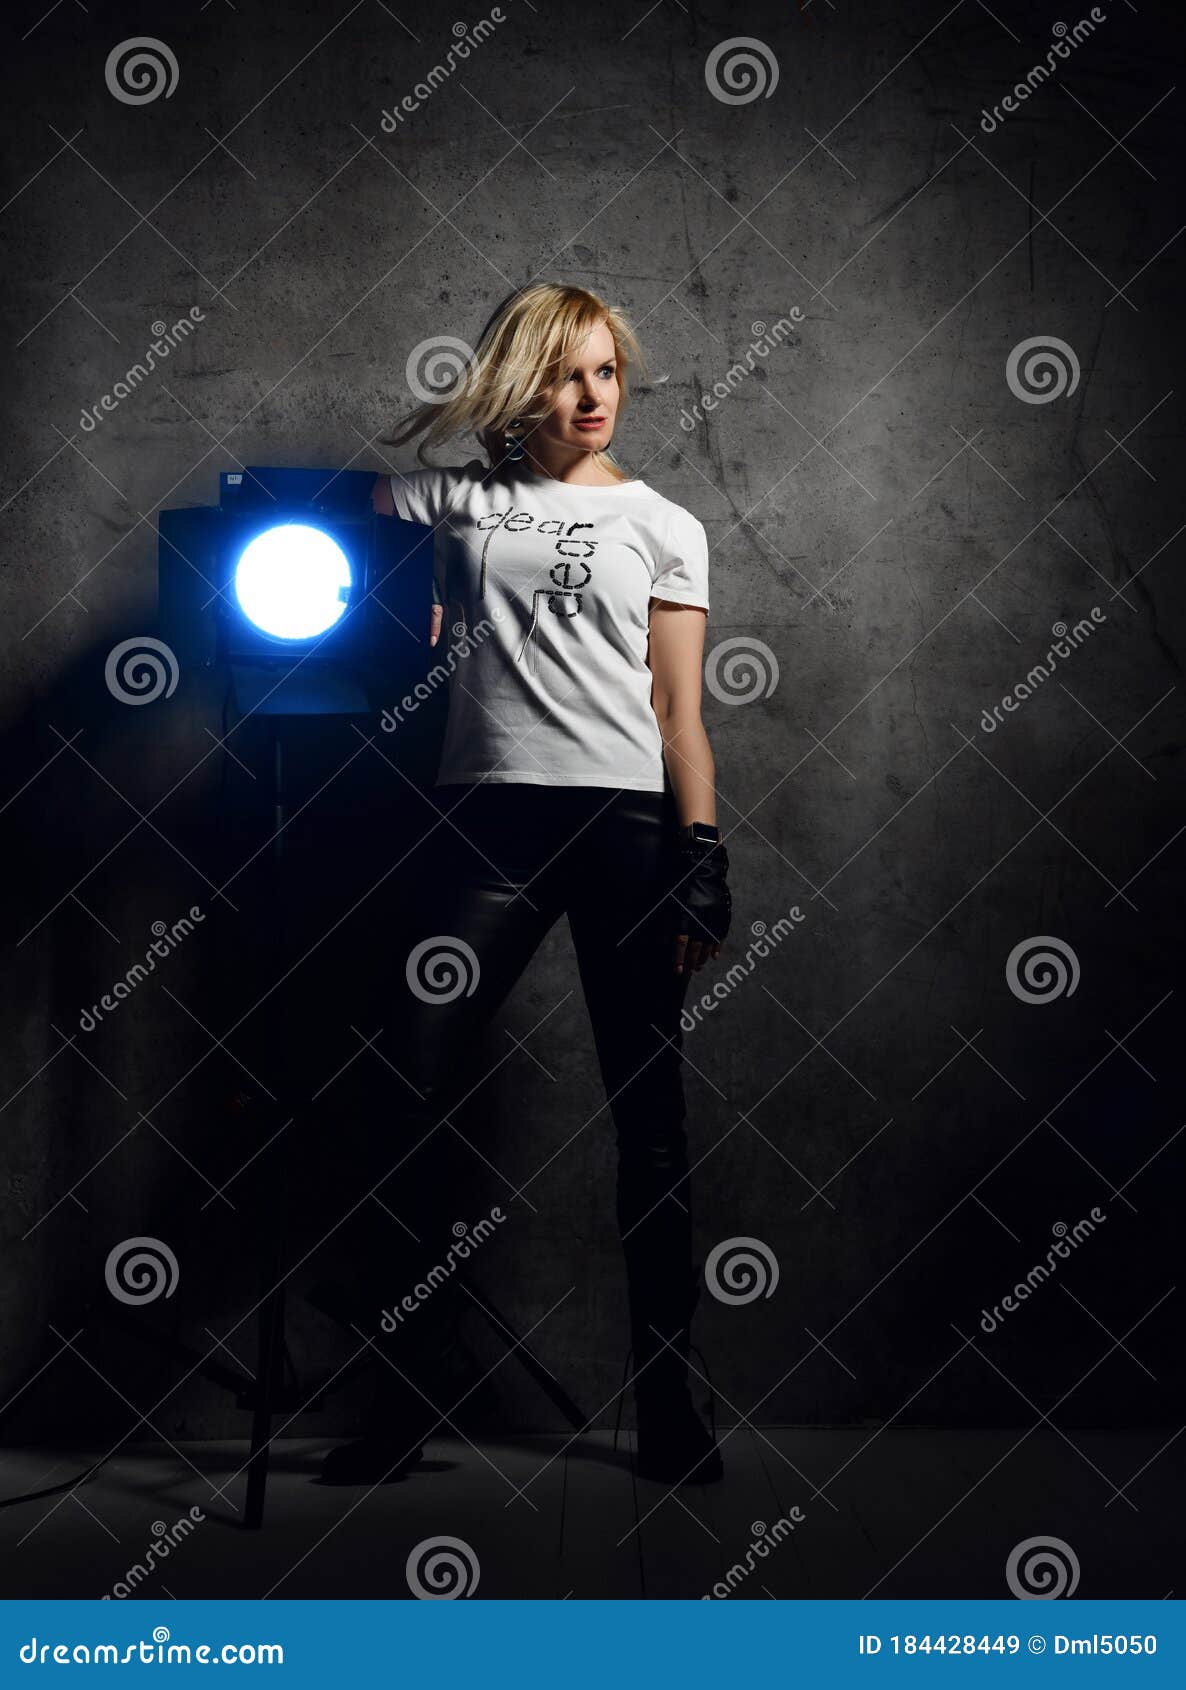 T-shirt and pants for girl stock image. Image of apparel - 107682553